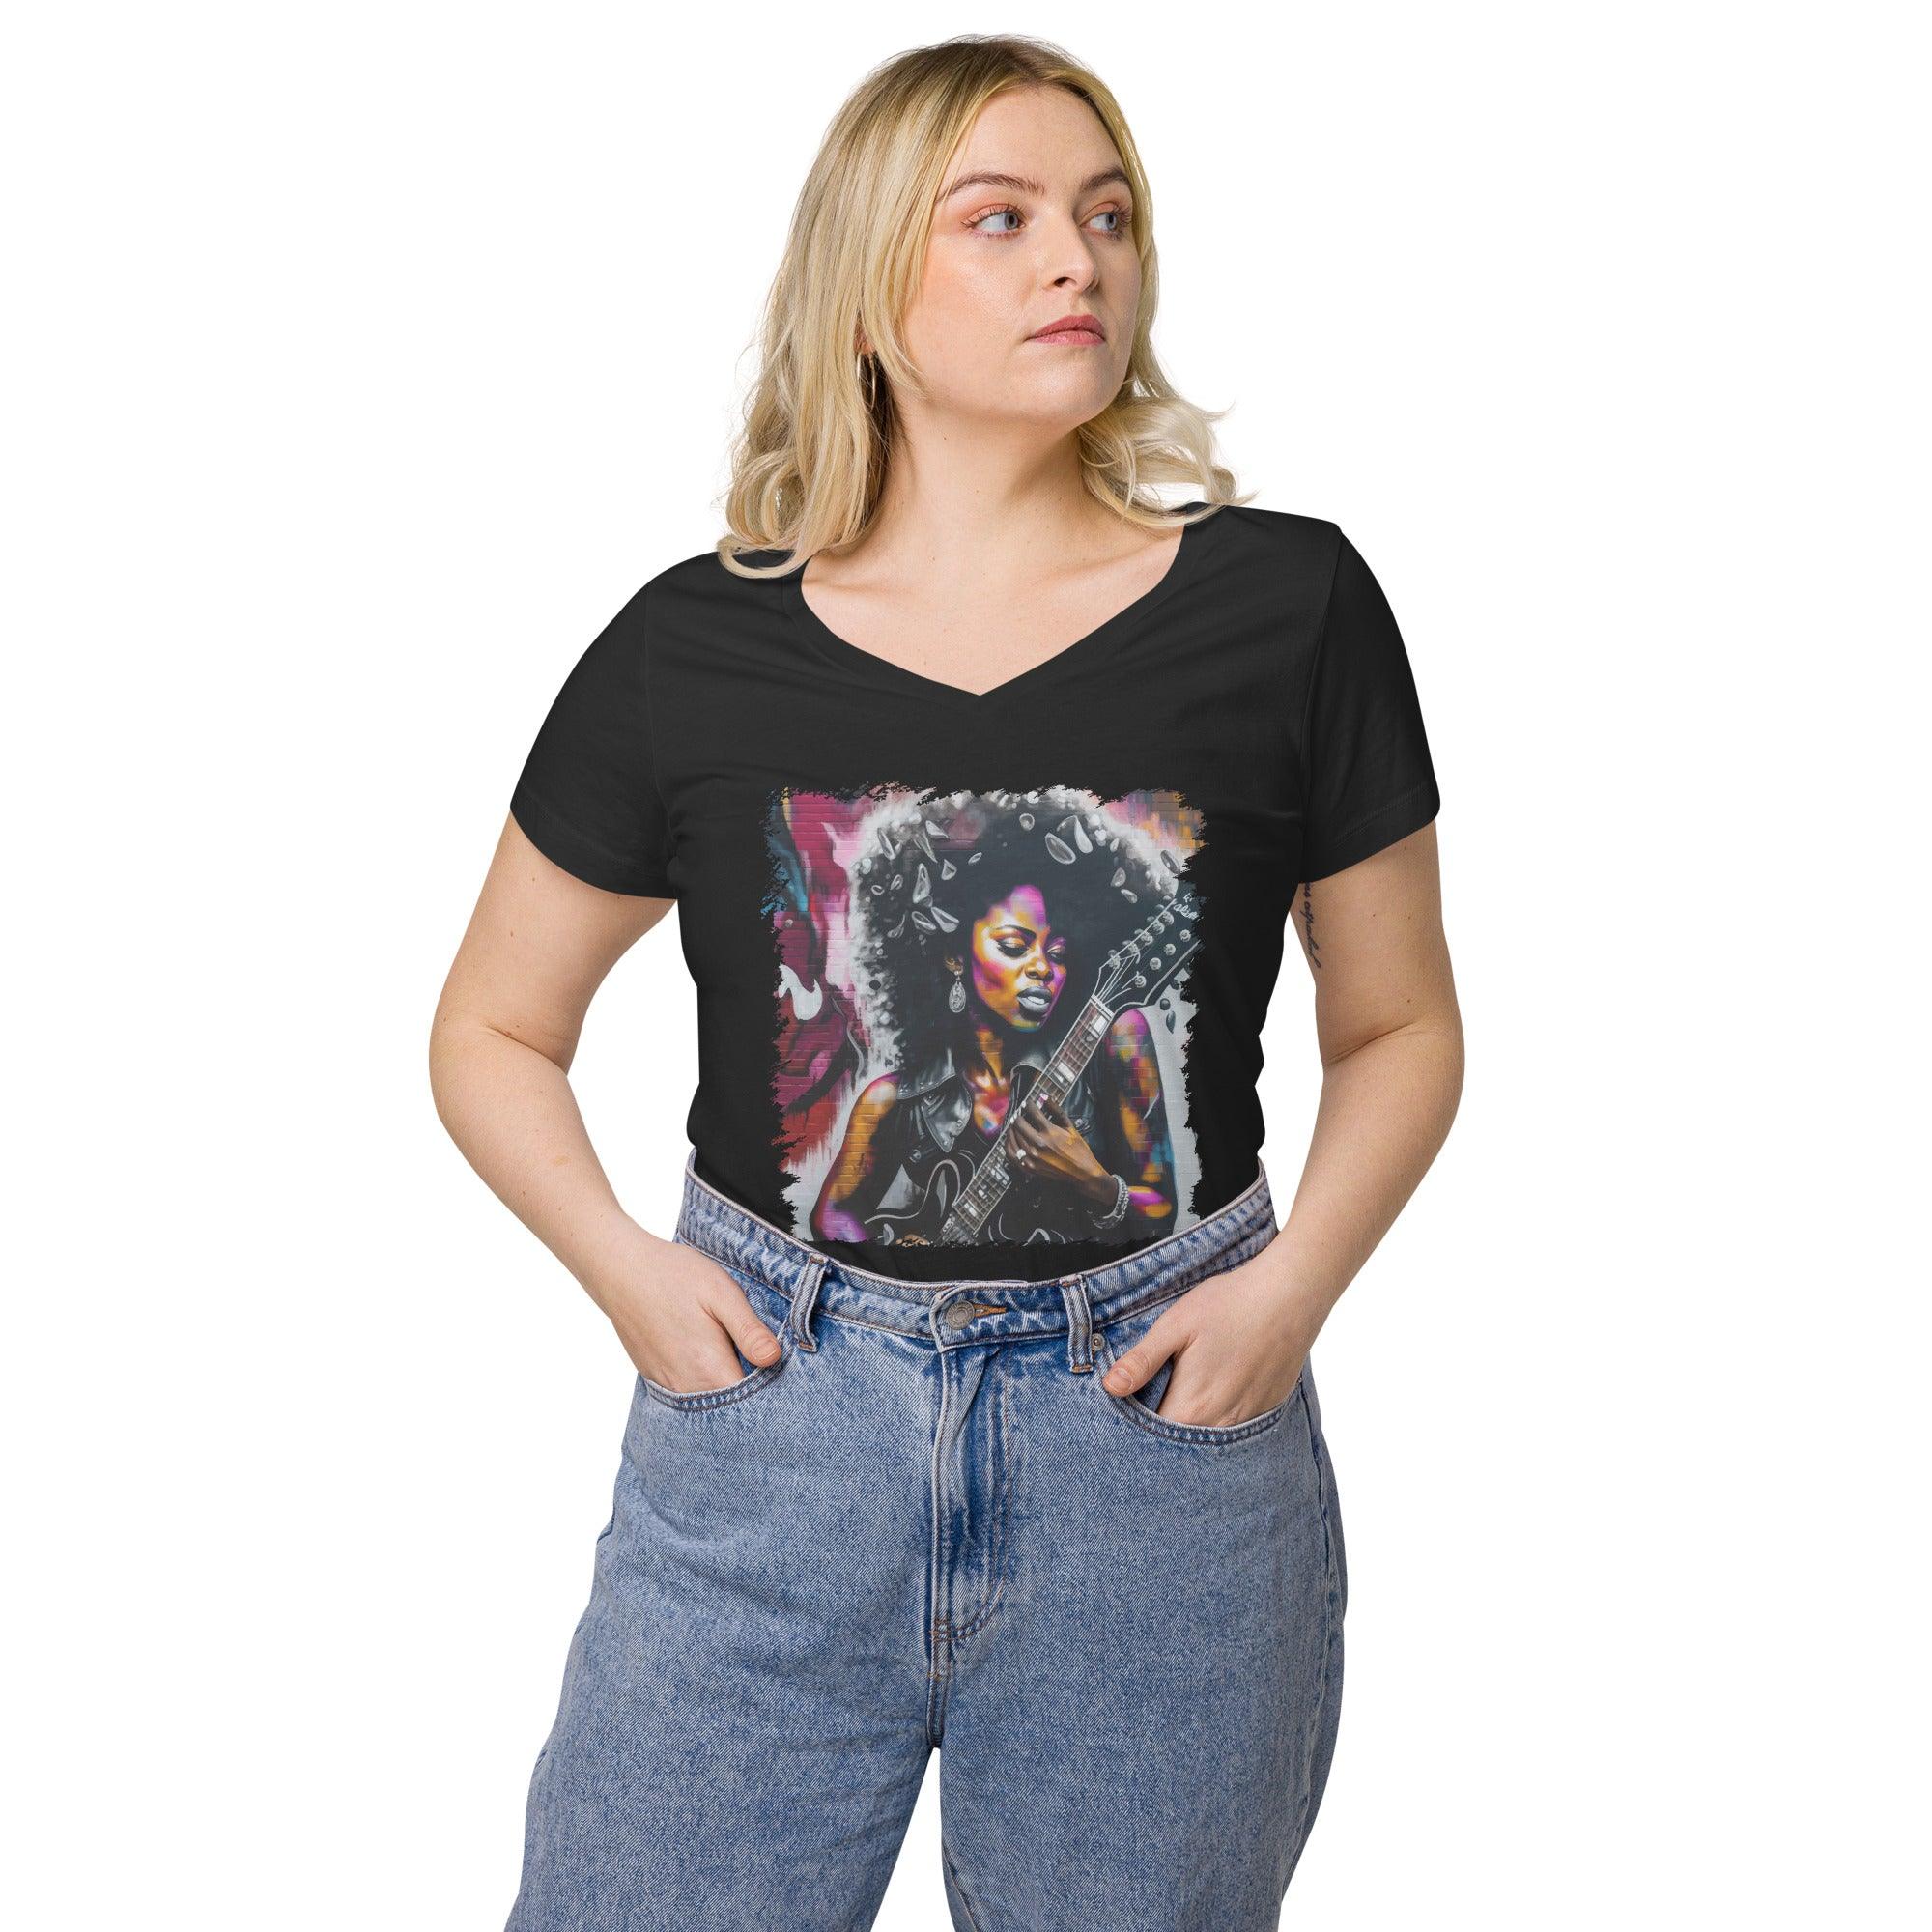 Rocking Out, Feminine Style Women’s Fitted V-neck T-shirt - Beyond T-shirts